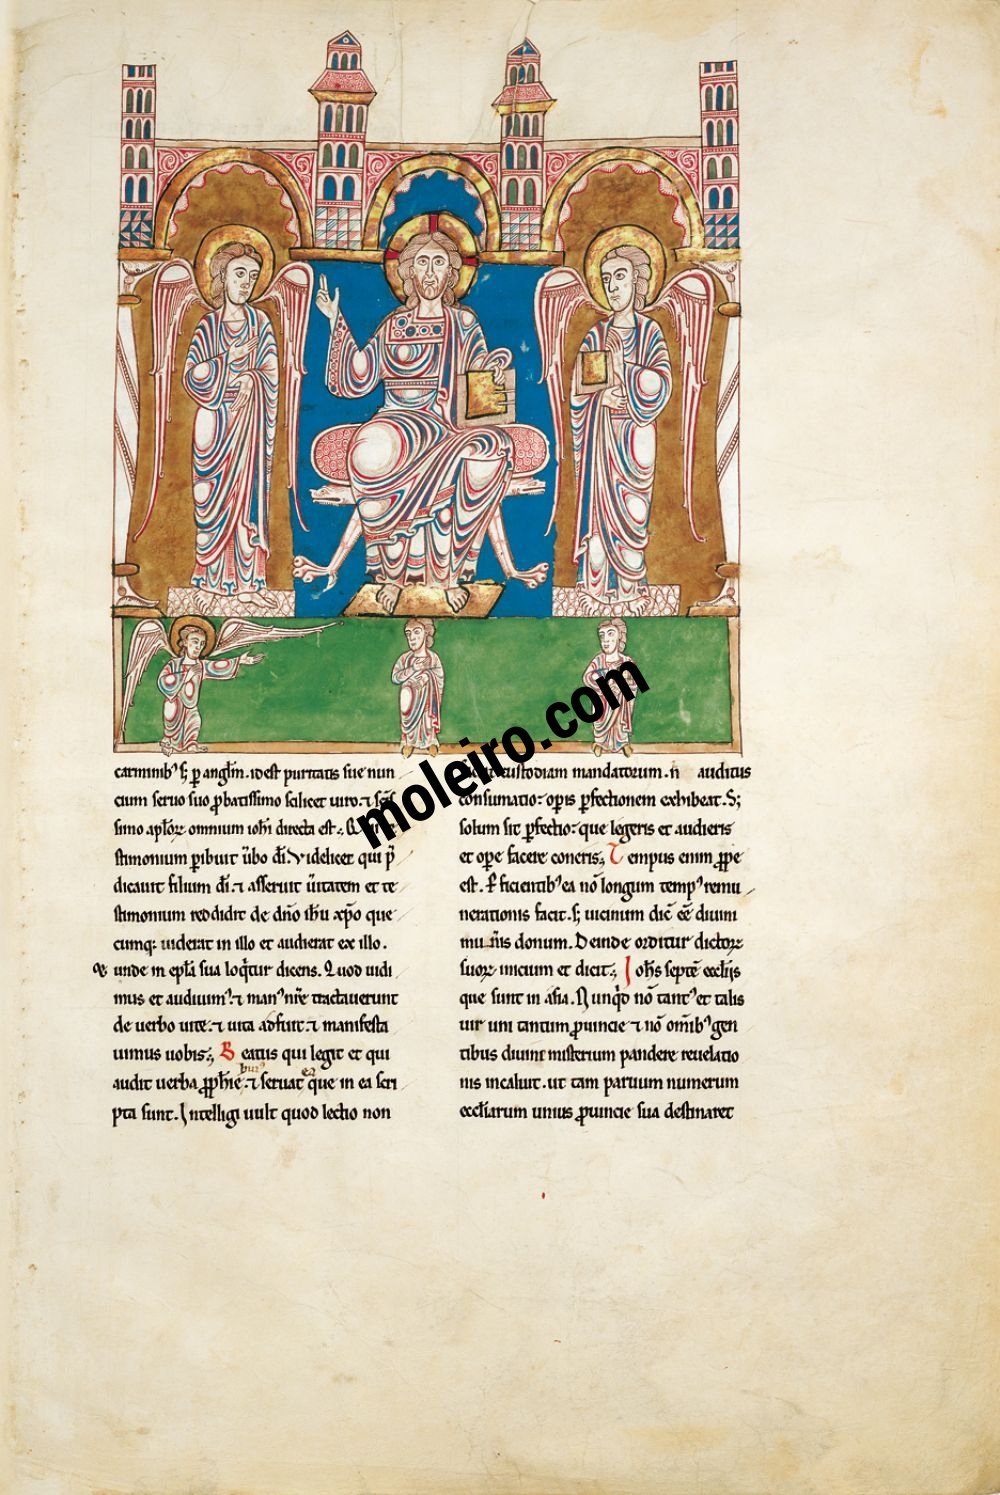 Cardeña Beatus f. 3A, God gives the book to the angel, who then gives it to John